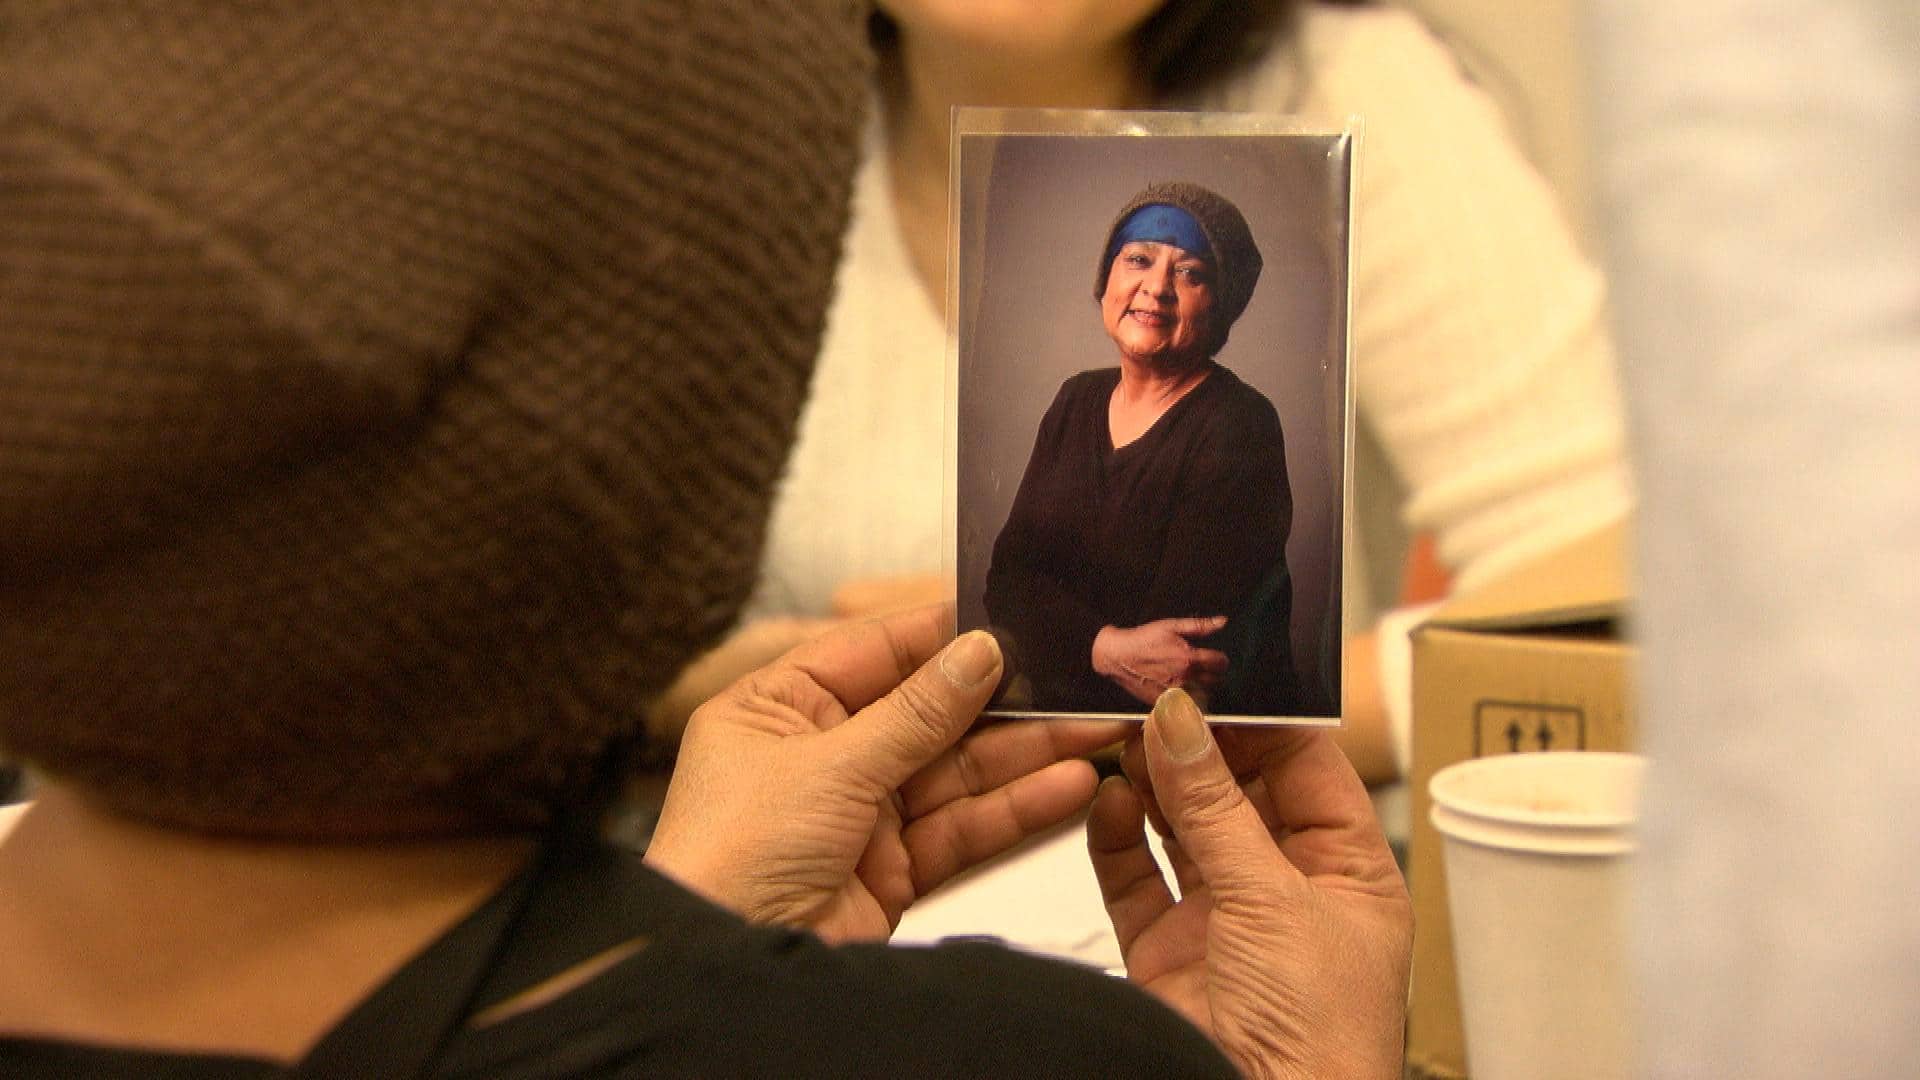 Smiles abound in Vancouver as non-profit offers holiday portrait sessions to unhoused people